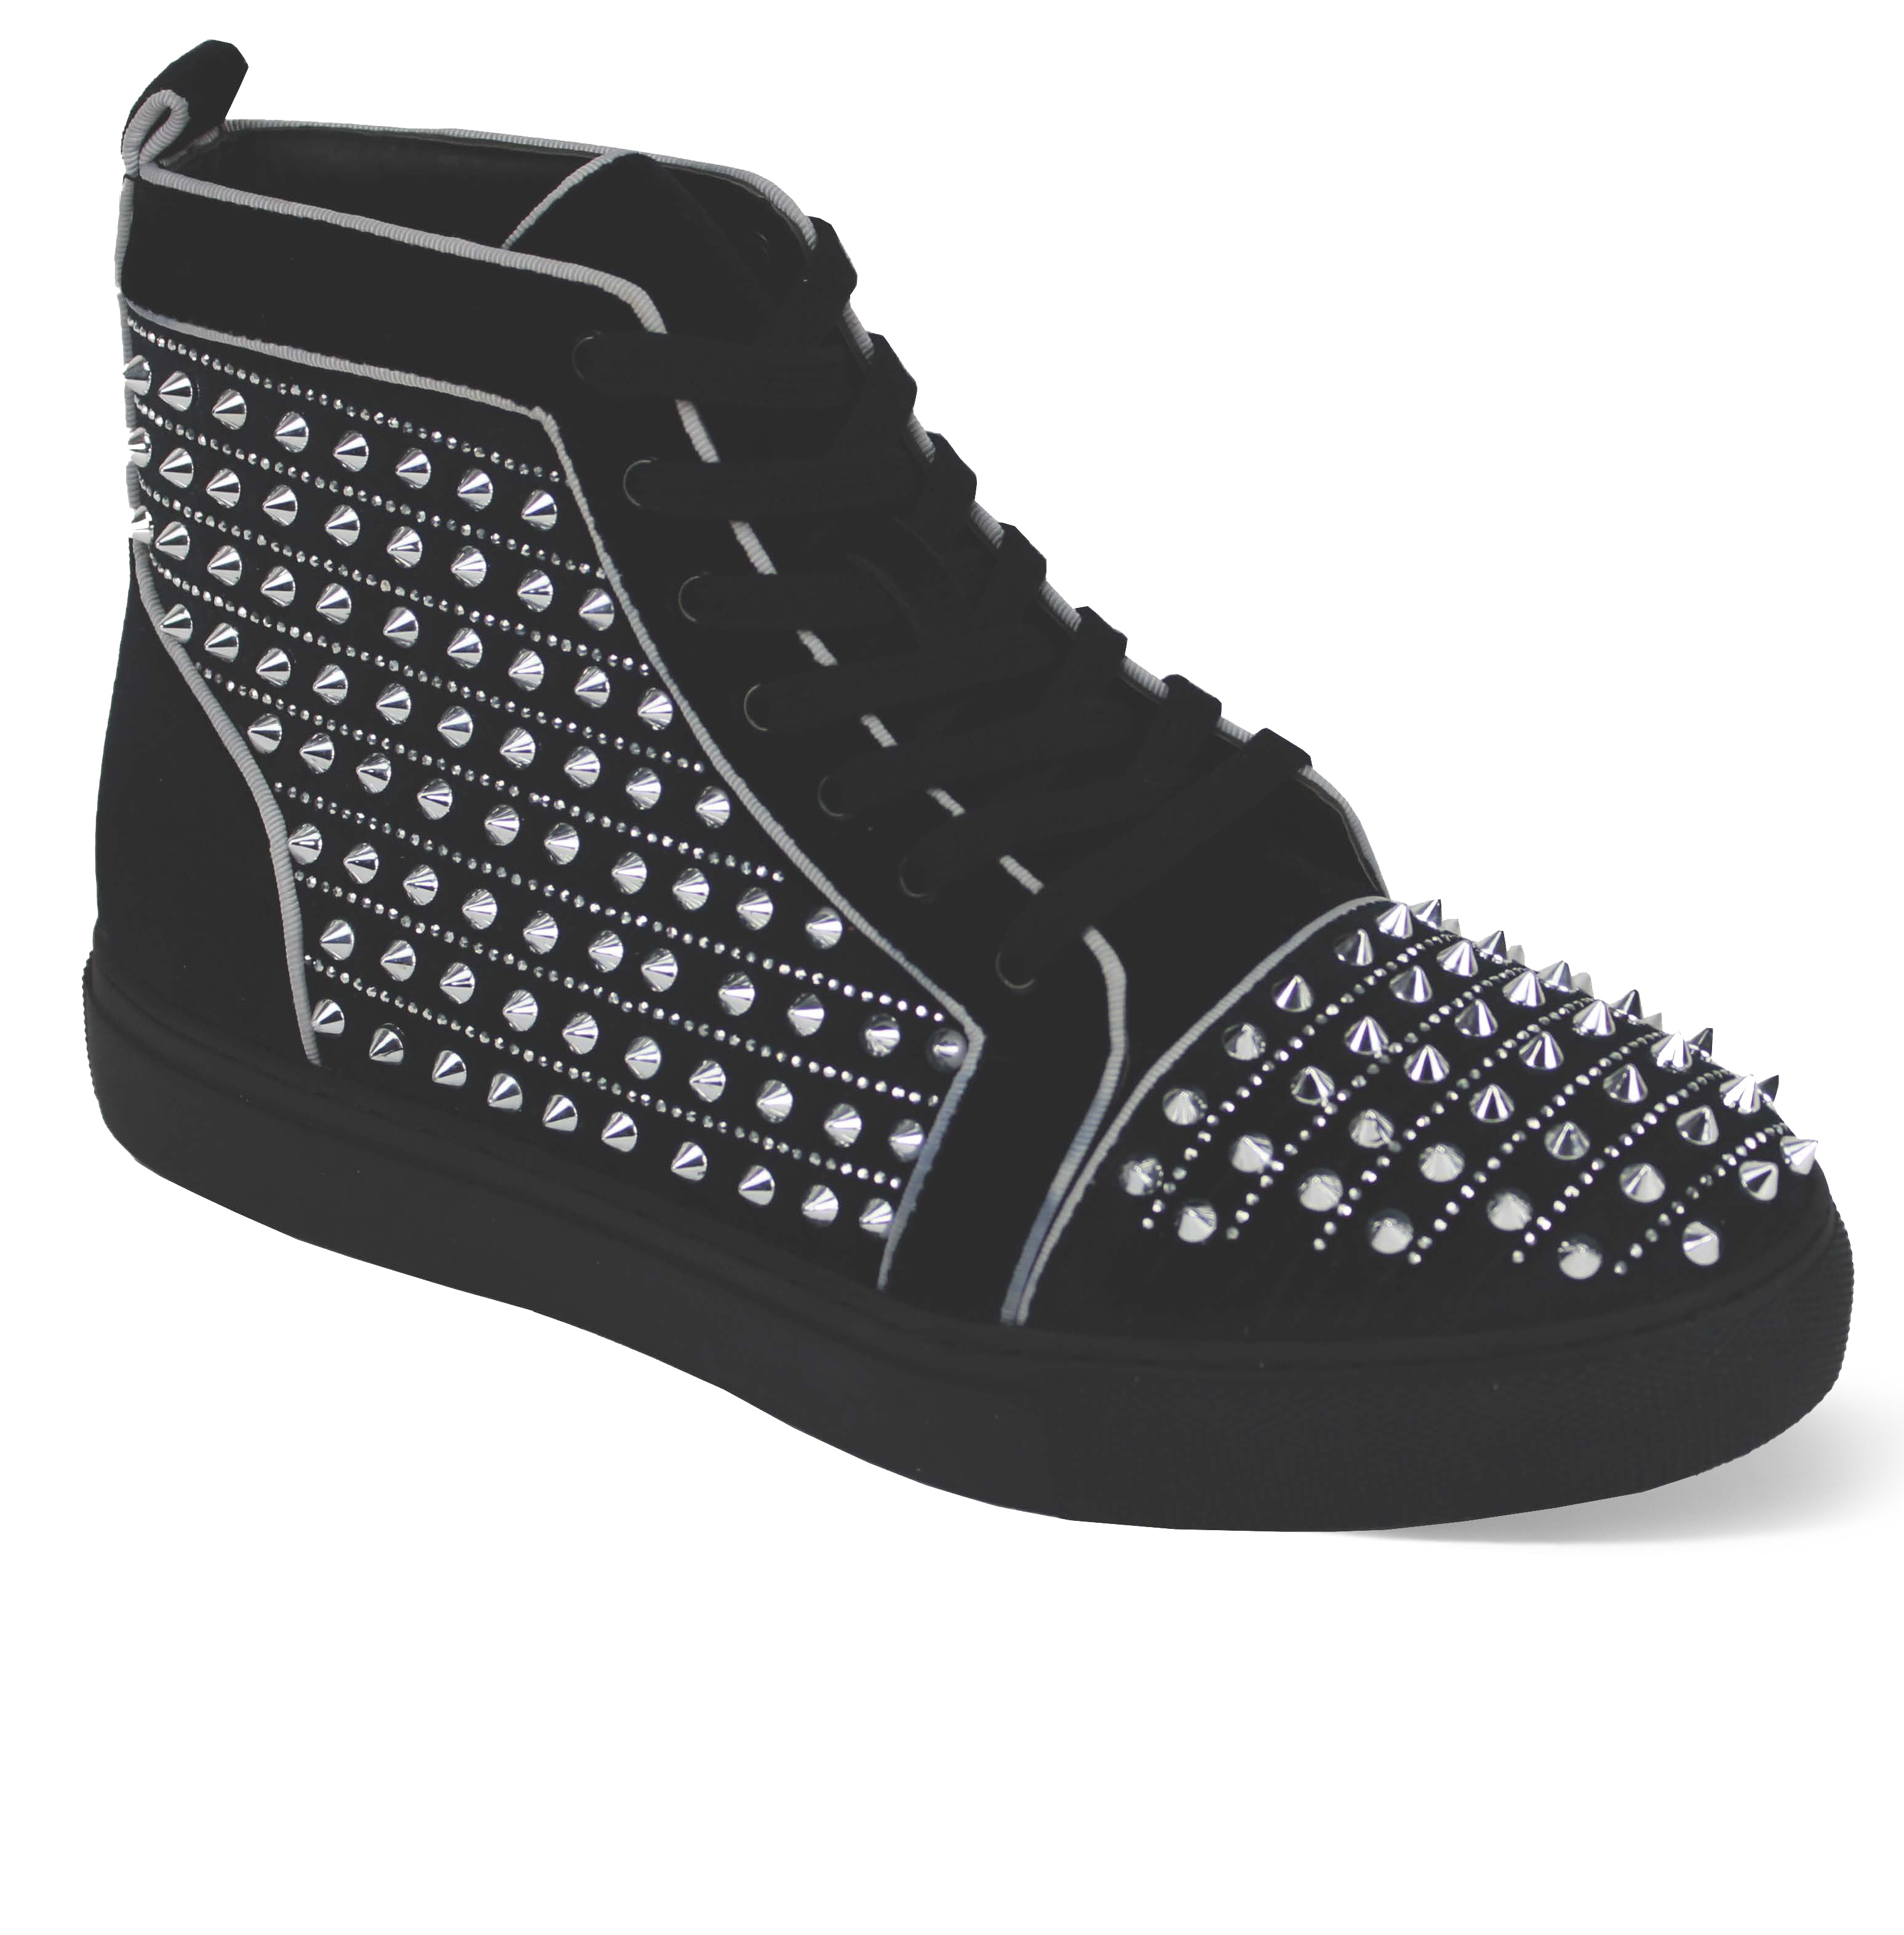 Buy After Midnight Junior Bedazzled Shoes at In Style – InStyle-Tuscaloosa